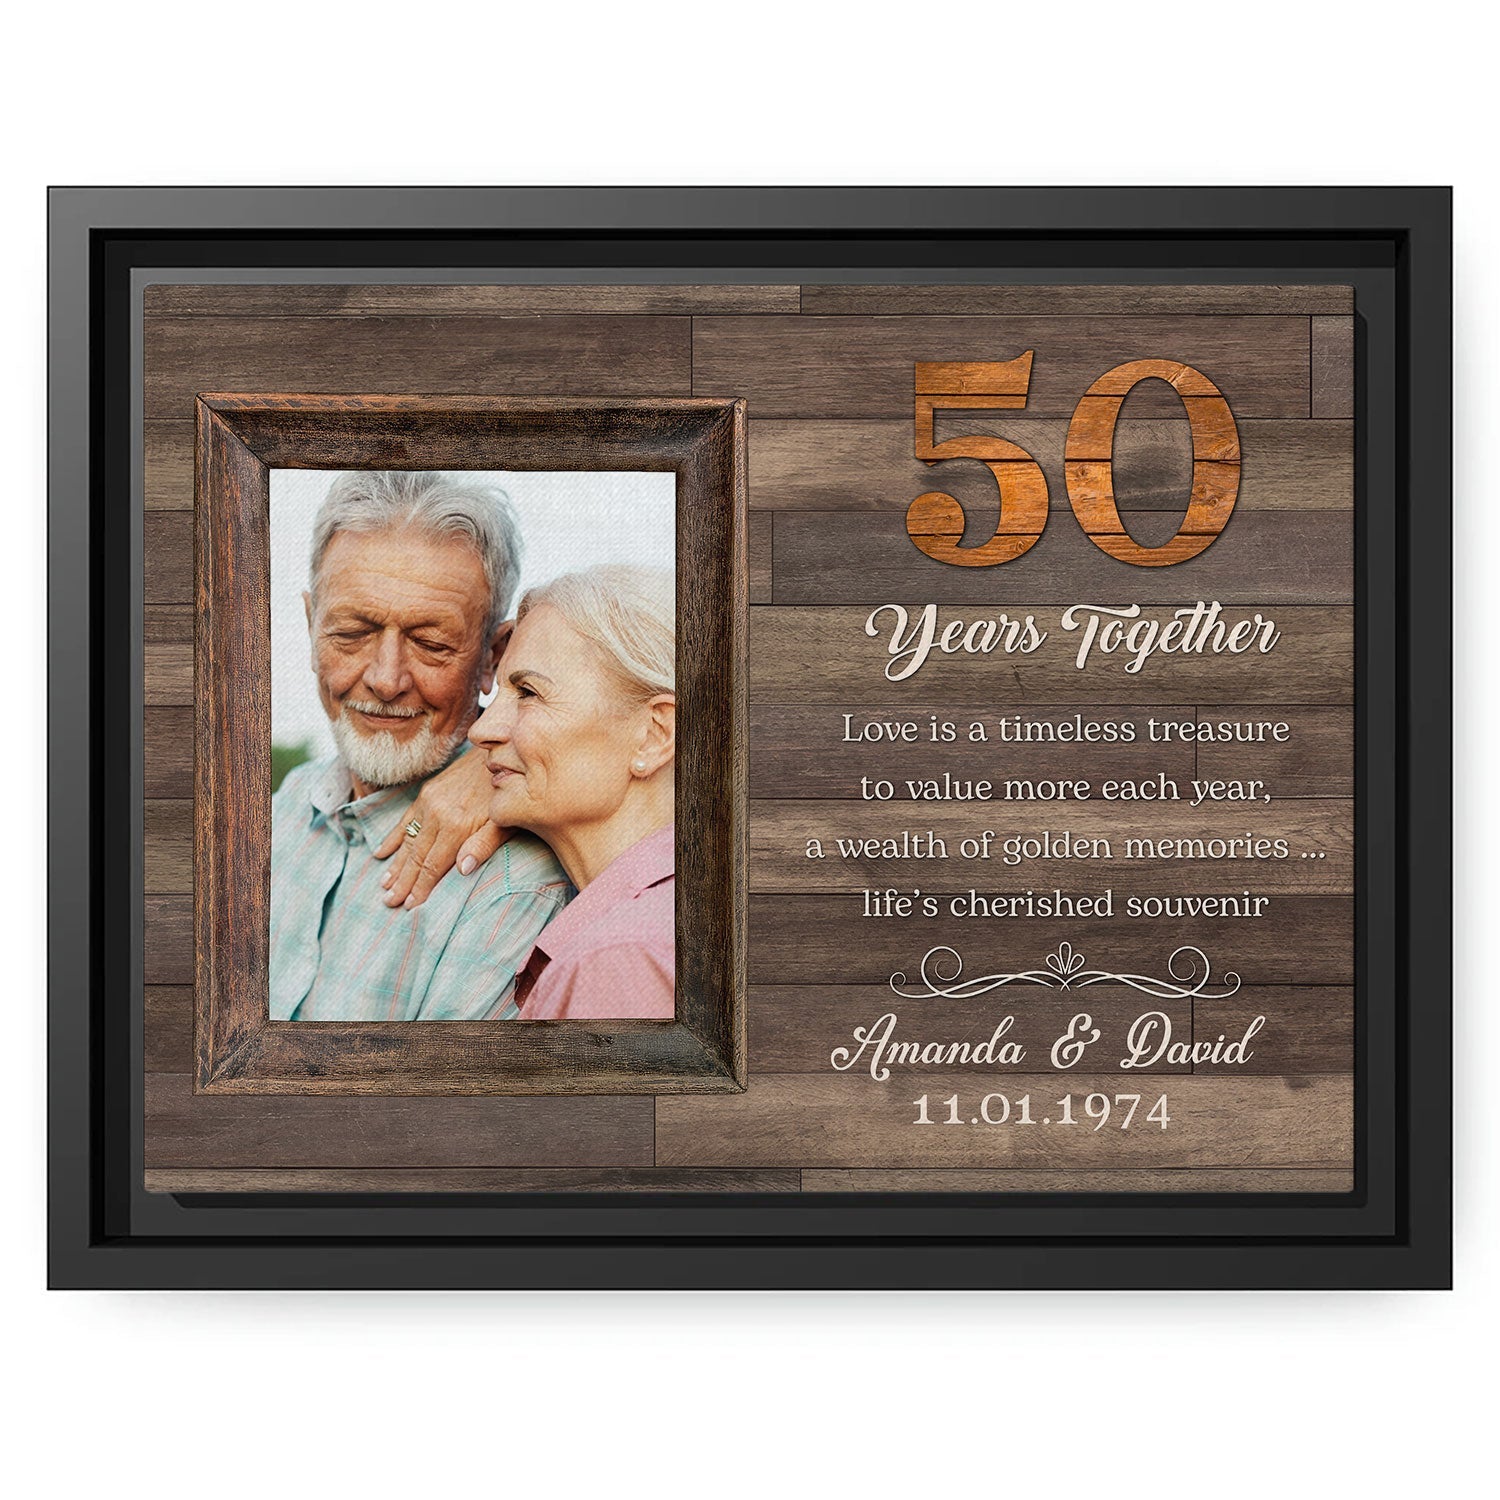 50 Years Together - Personalized 50 Year Anniversary gift For Parents, Friends, Husband or Wife - Custom Canvas Print - MyMindfulGifts